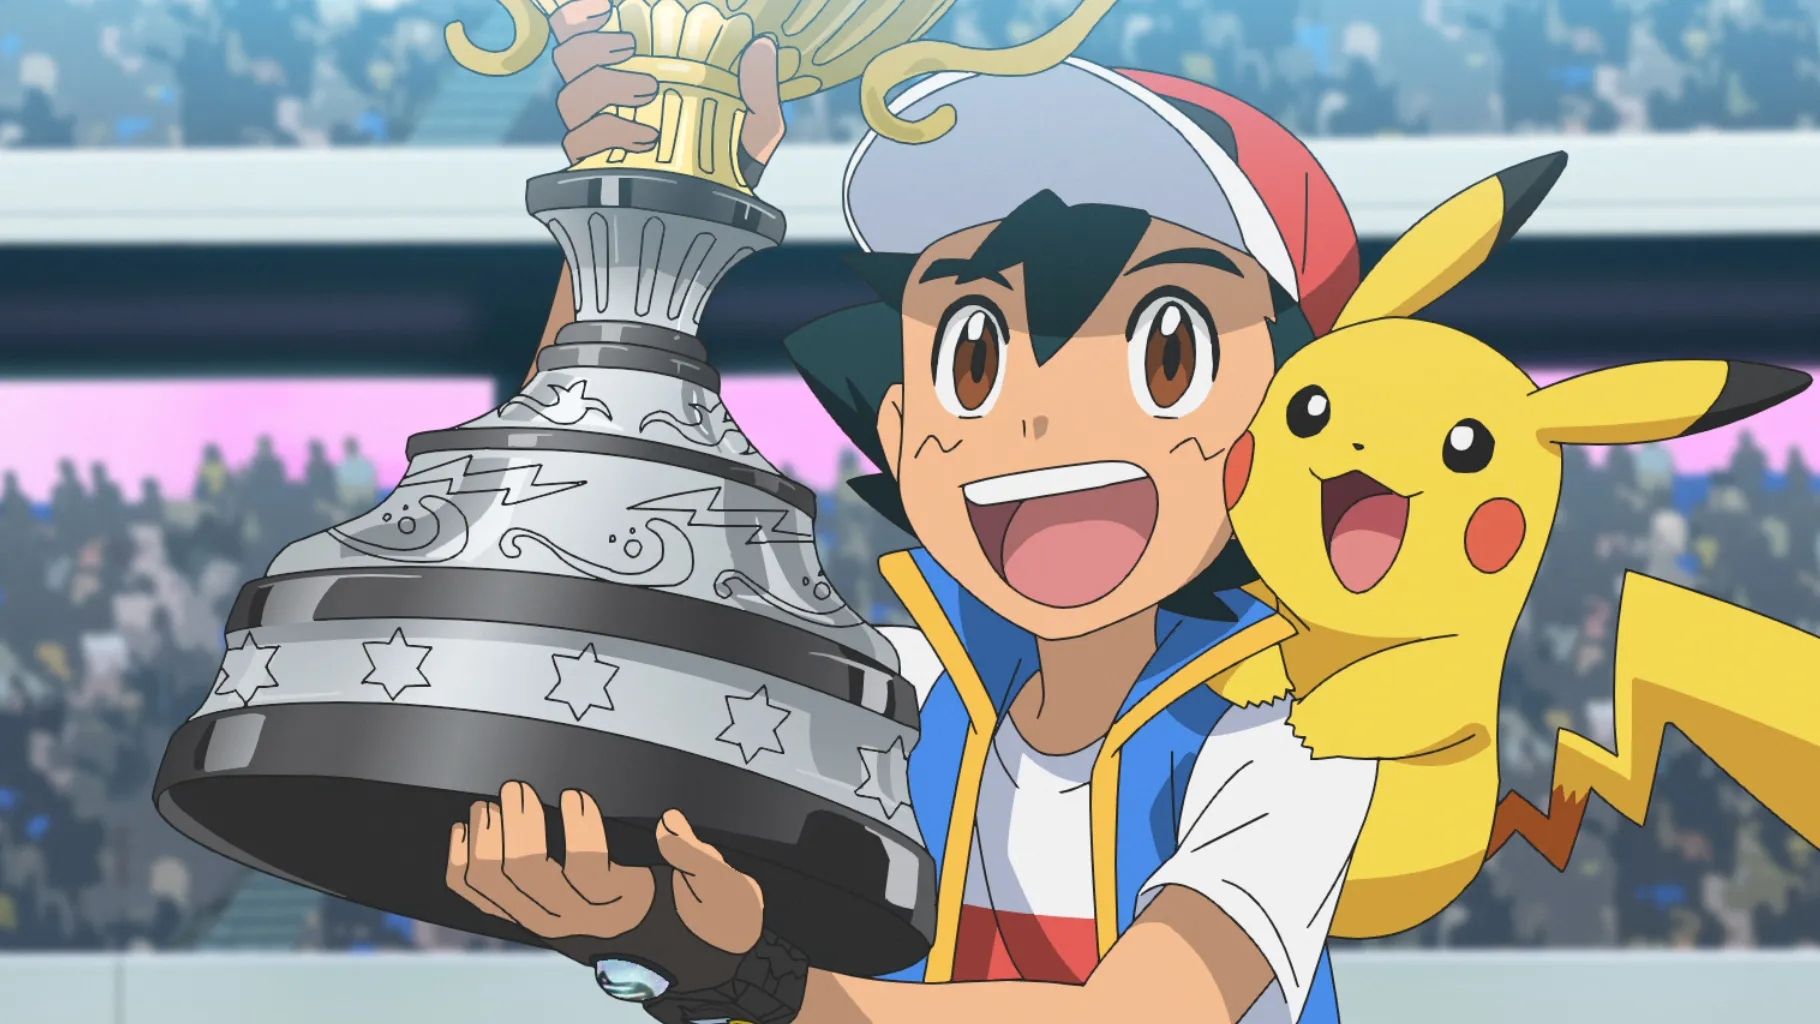 Ash happily lifts the Champion's trophy in the Pokémon anime, with Pikachu on his shoulder.